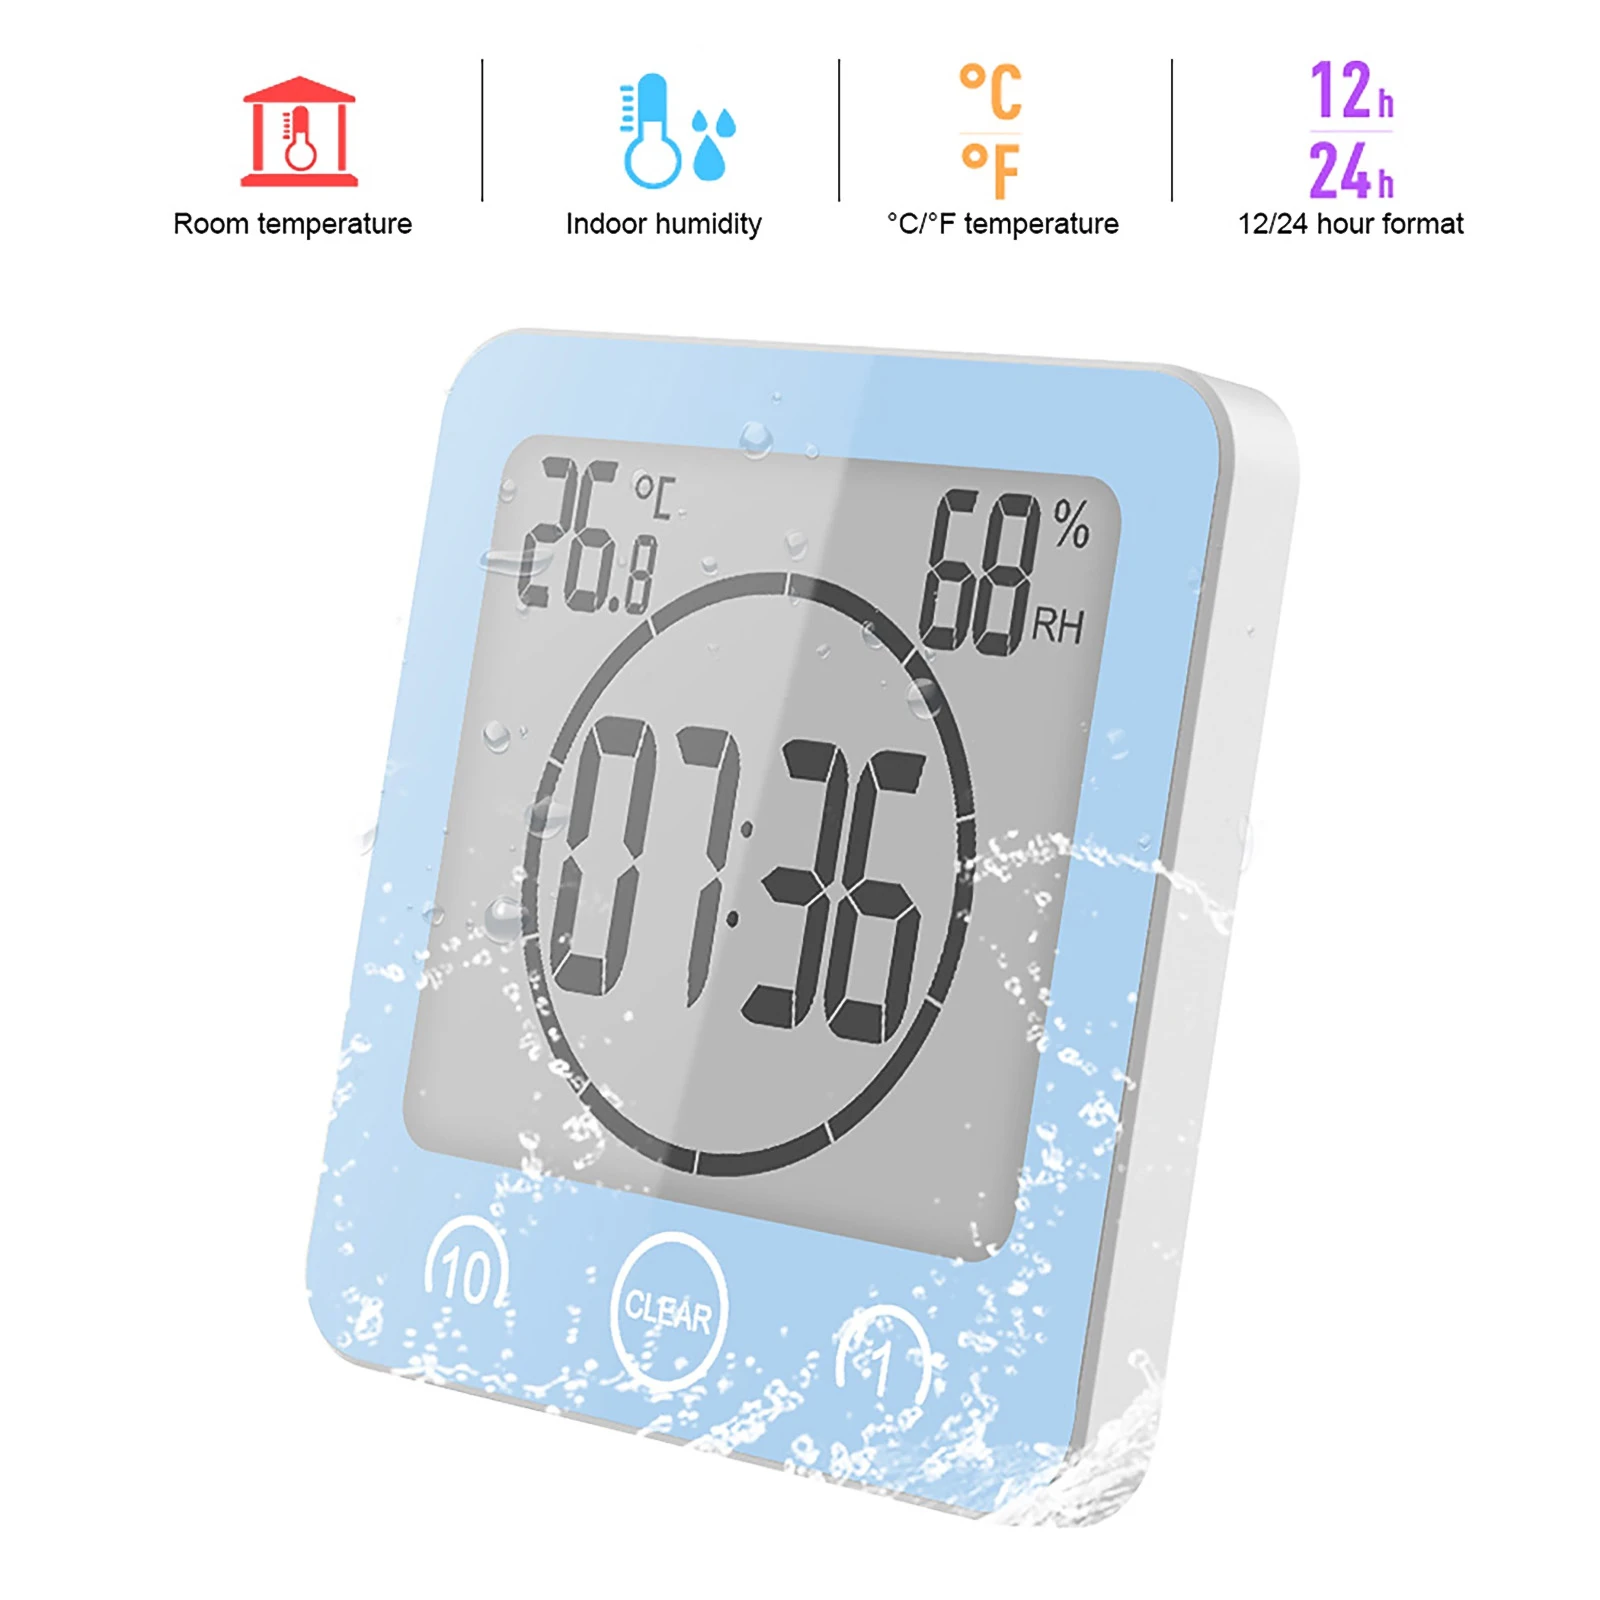 LCD Digital Waterproof For Water Splashes Bathroom Wall Clock Shower Clocks Timer Temperature Humidity Kitchen Wash Room Timers